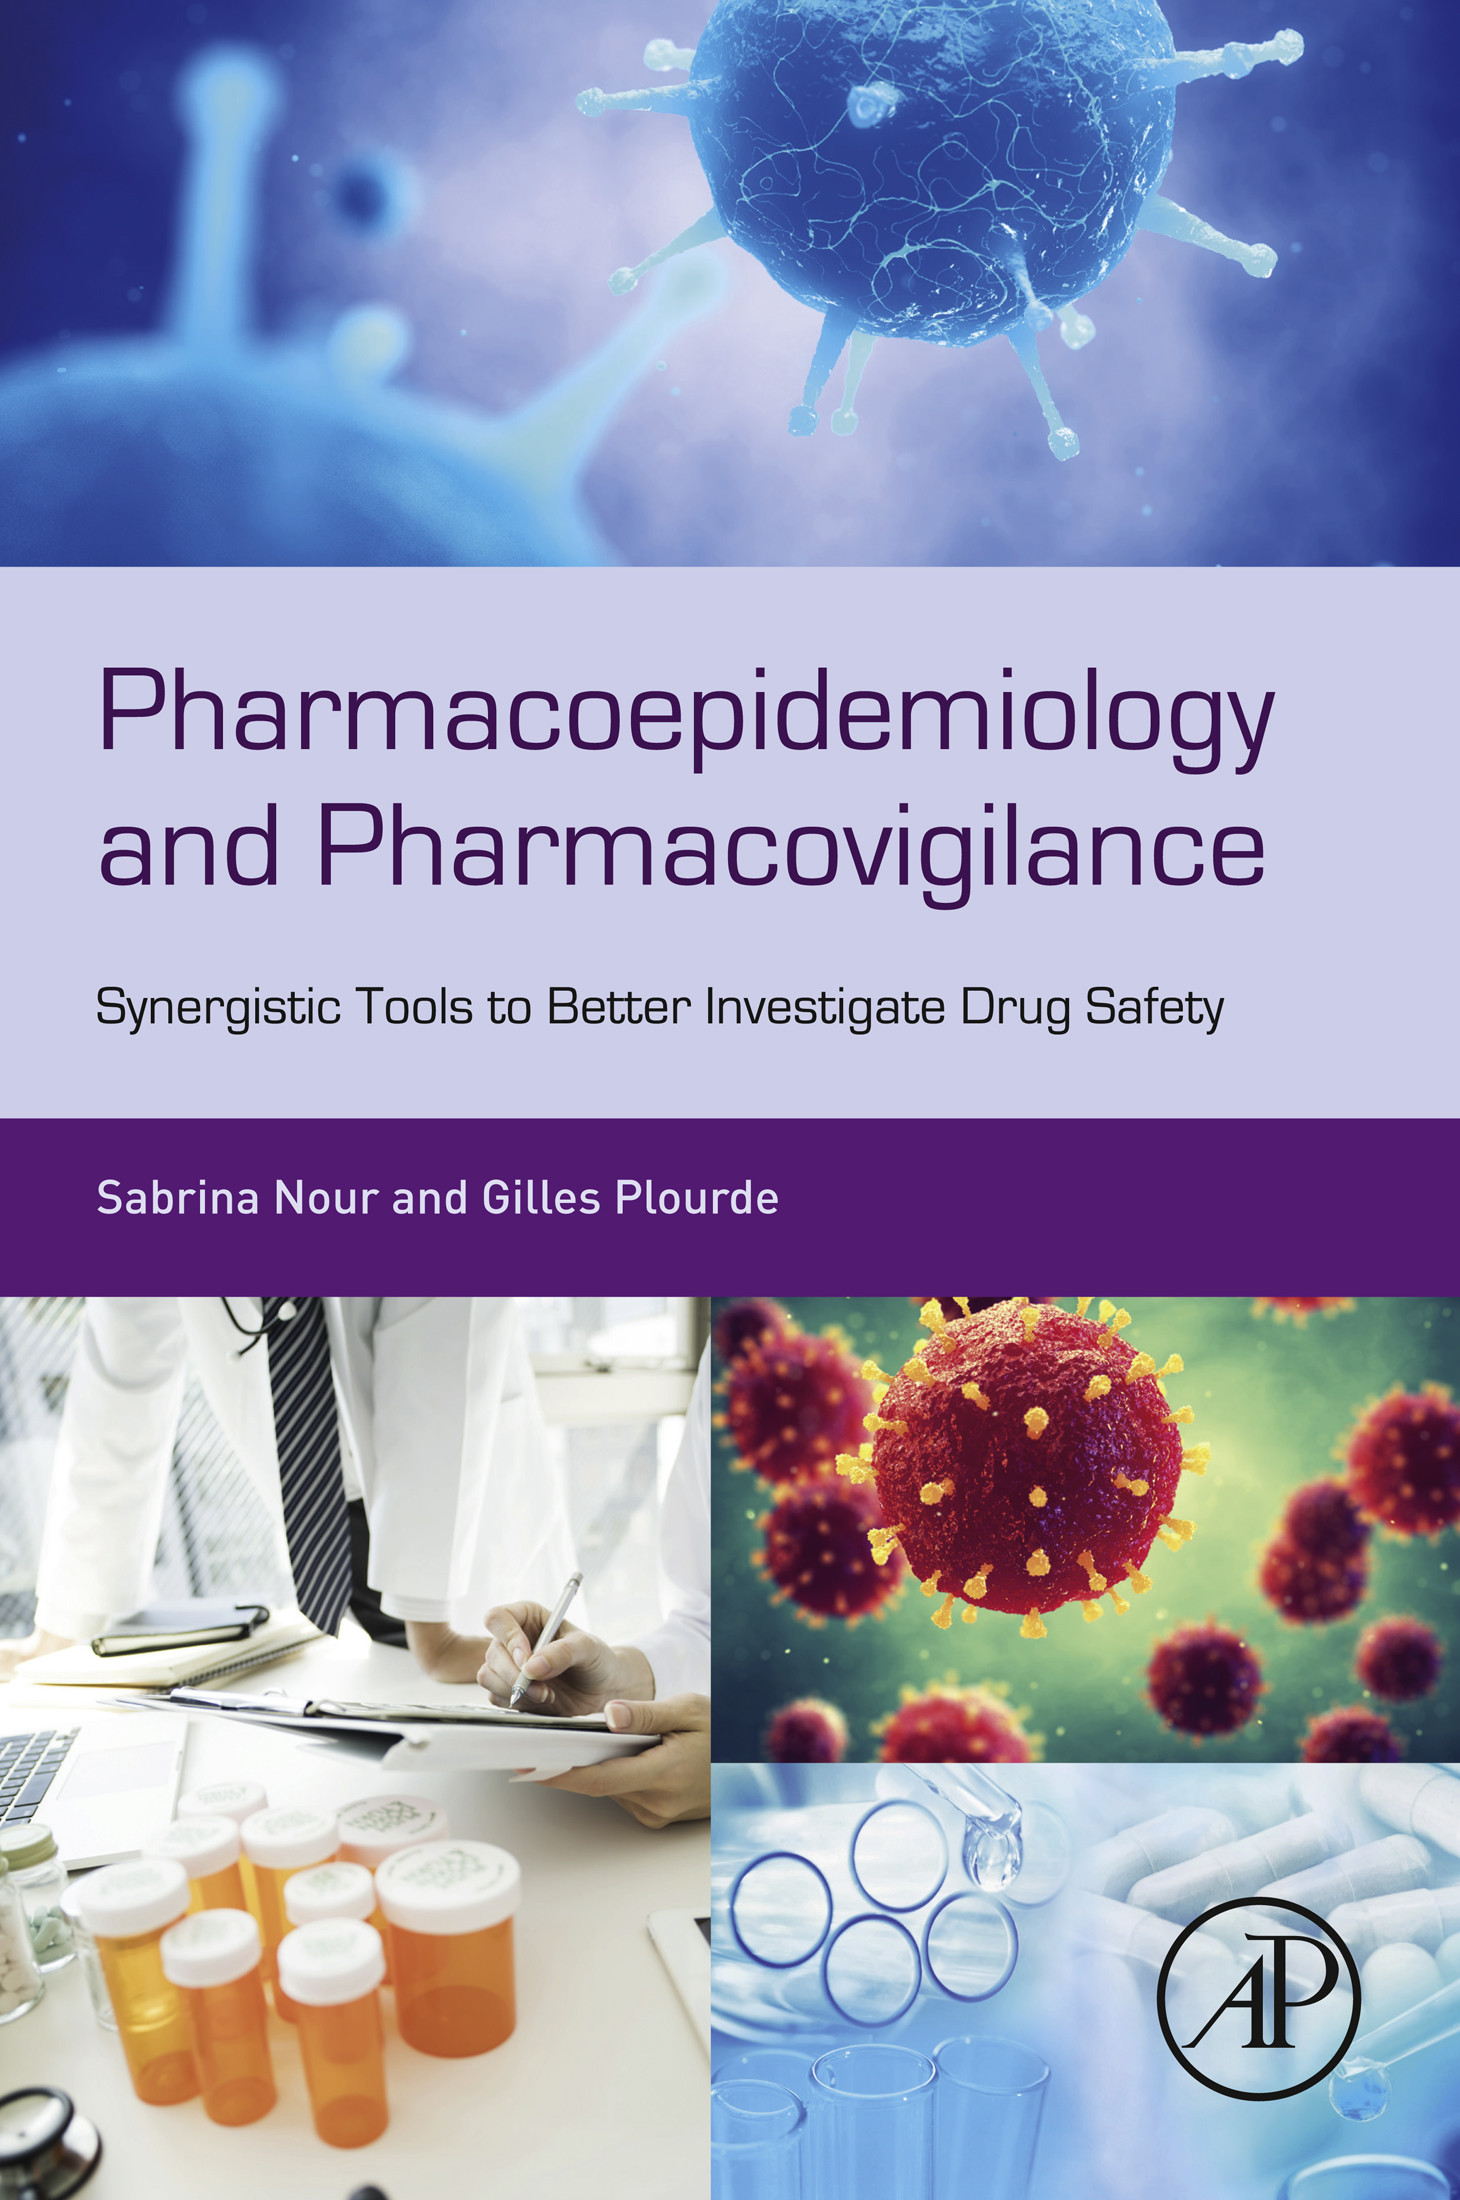 clinical research and pharmacovigilance book pdf free download